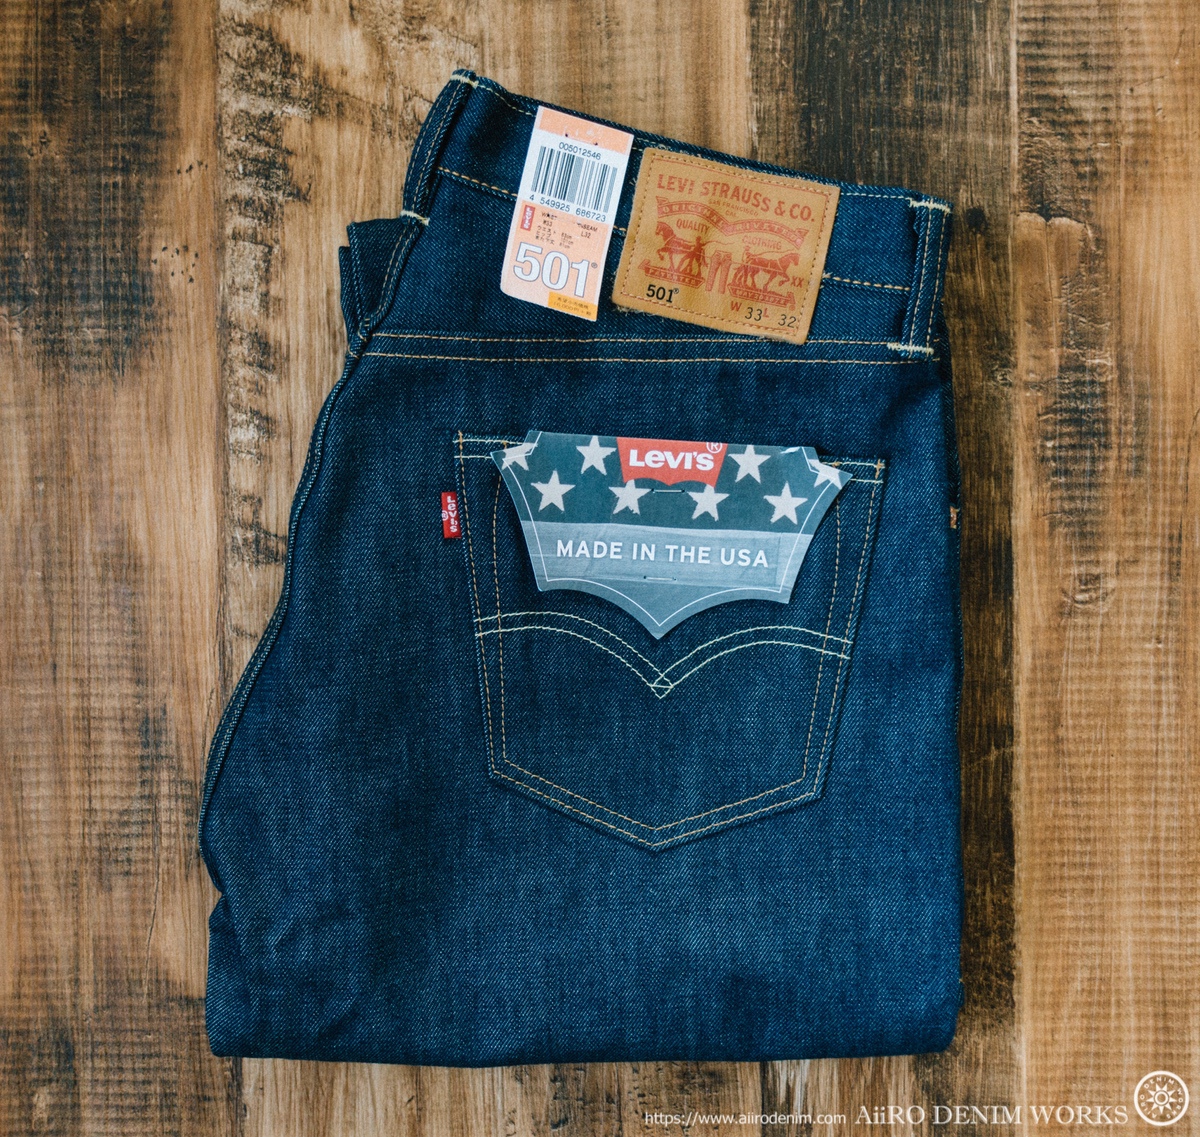 Levi's 501 Made In The USA Rigid セルビッチ